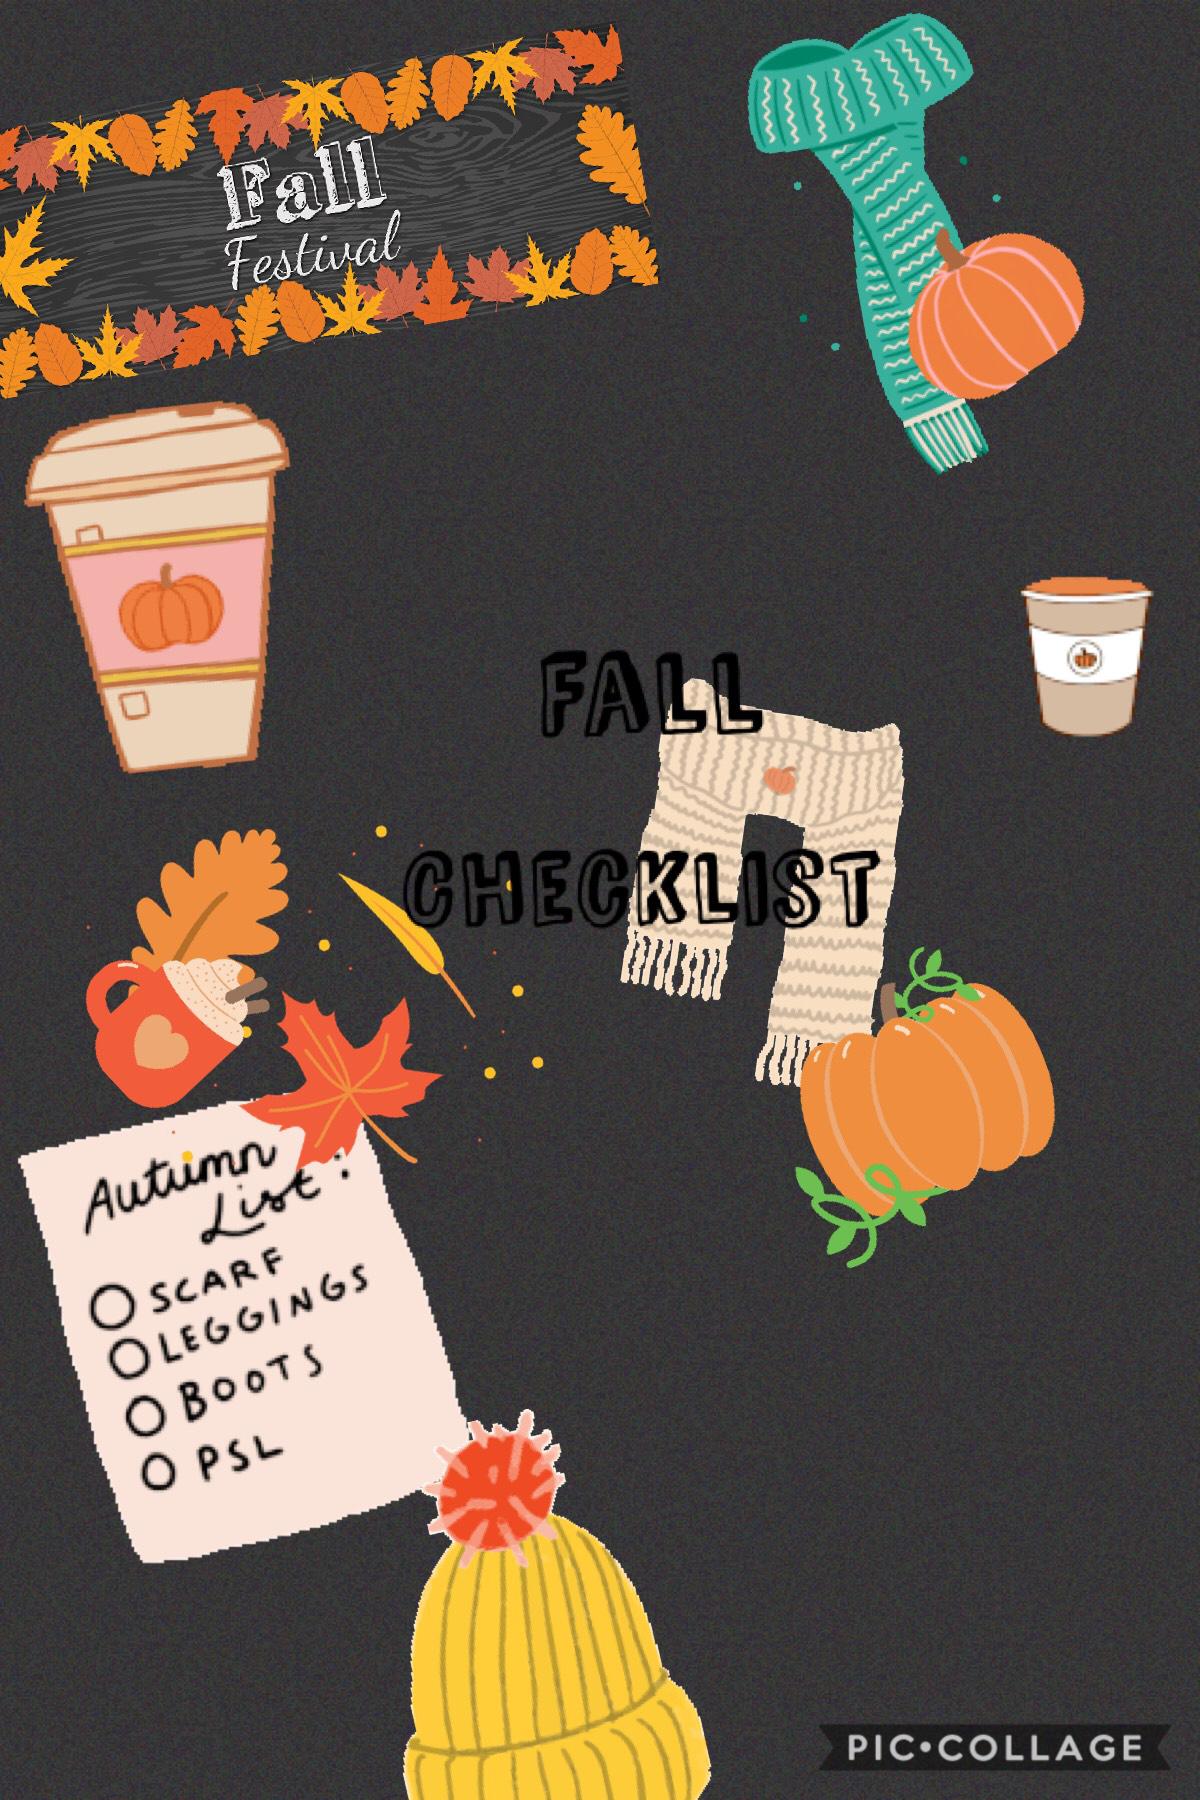 *tap this*
These are just some fun stuff to do in fall and fall outfits are so cute!!!!❤️❤️